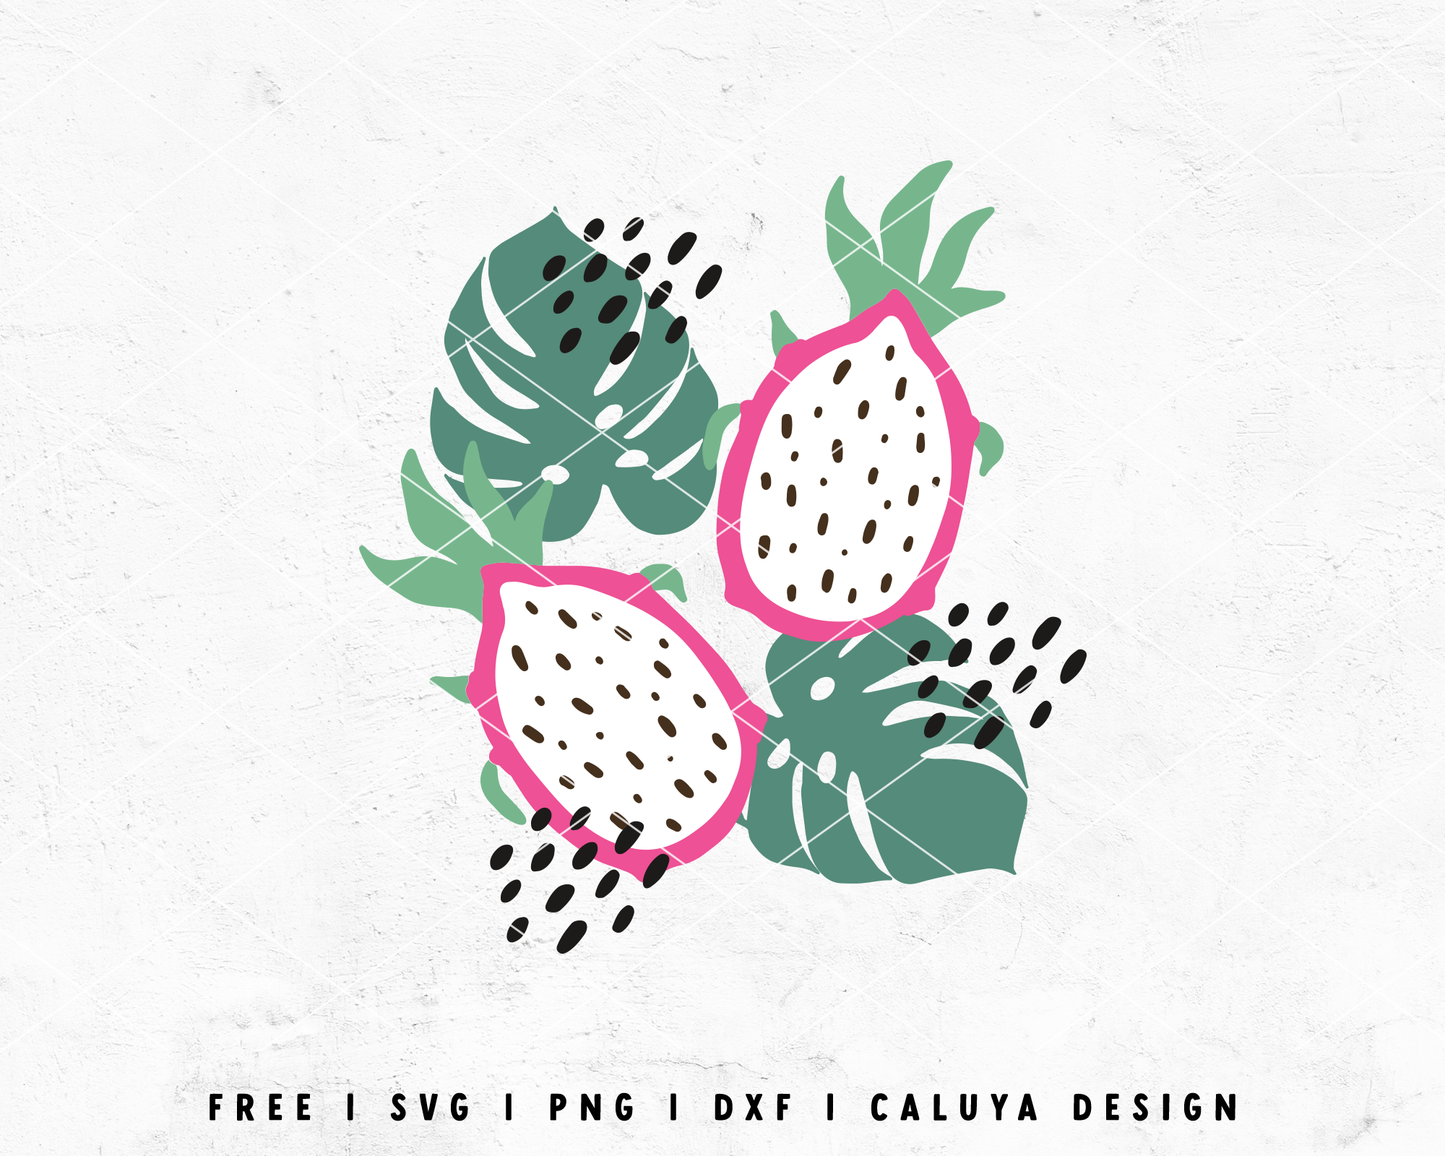 FREE Dragon Fruits SVG | Monstra SVG | Tropical SVG Cut File for Cricut, Cameo Silhouette | Free SVG Cut File